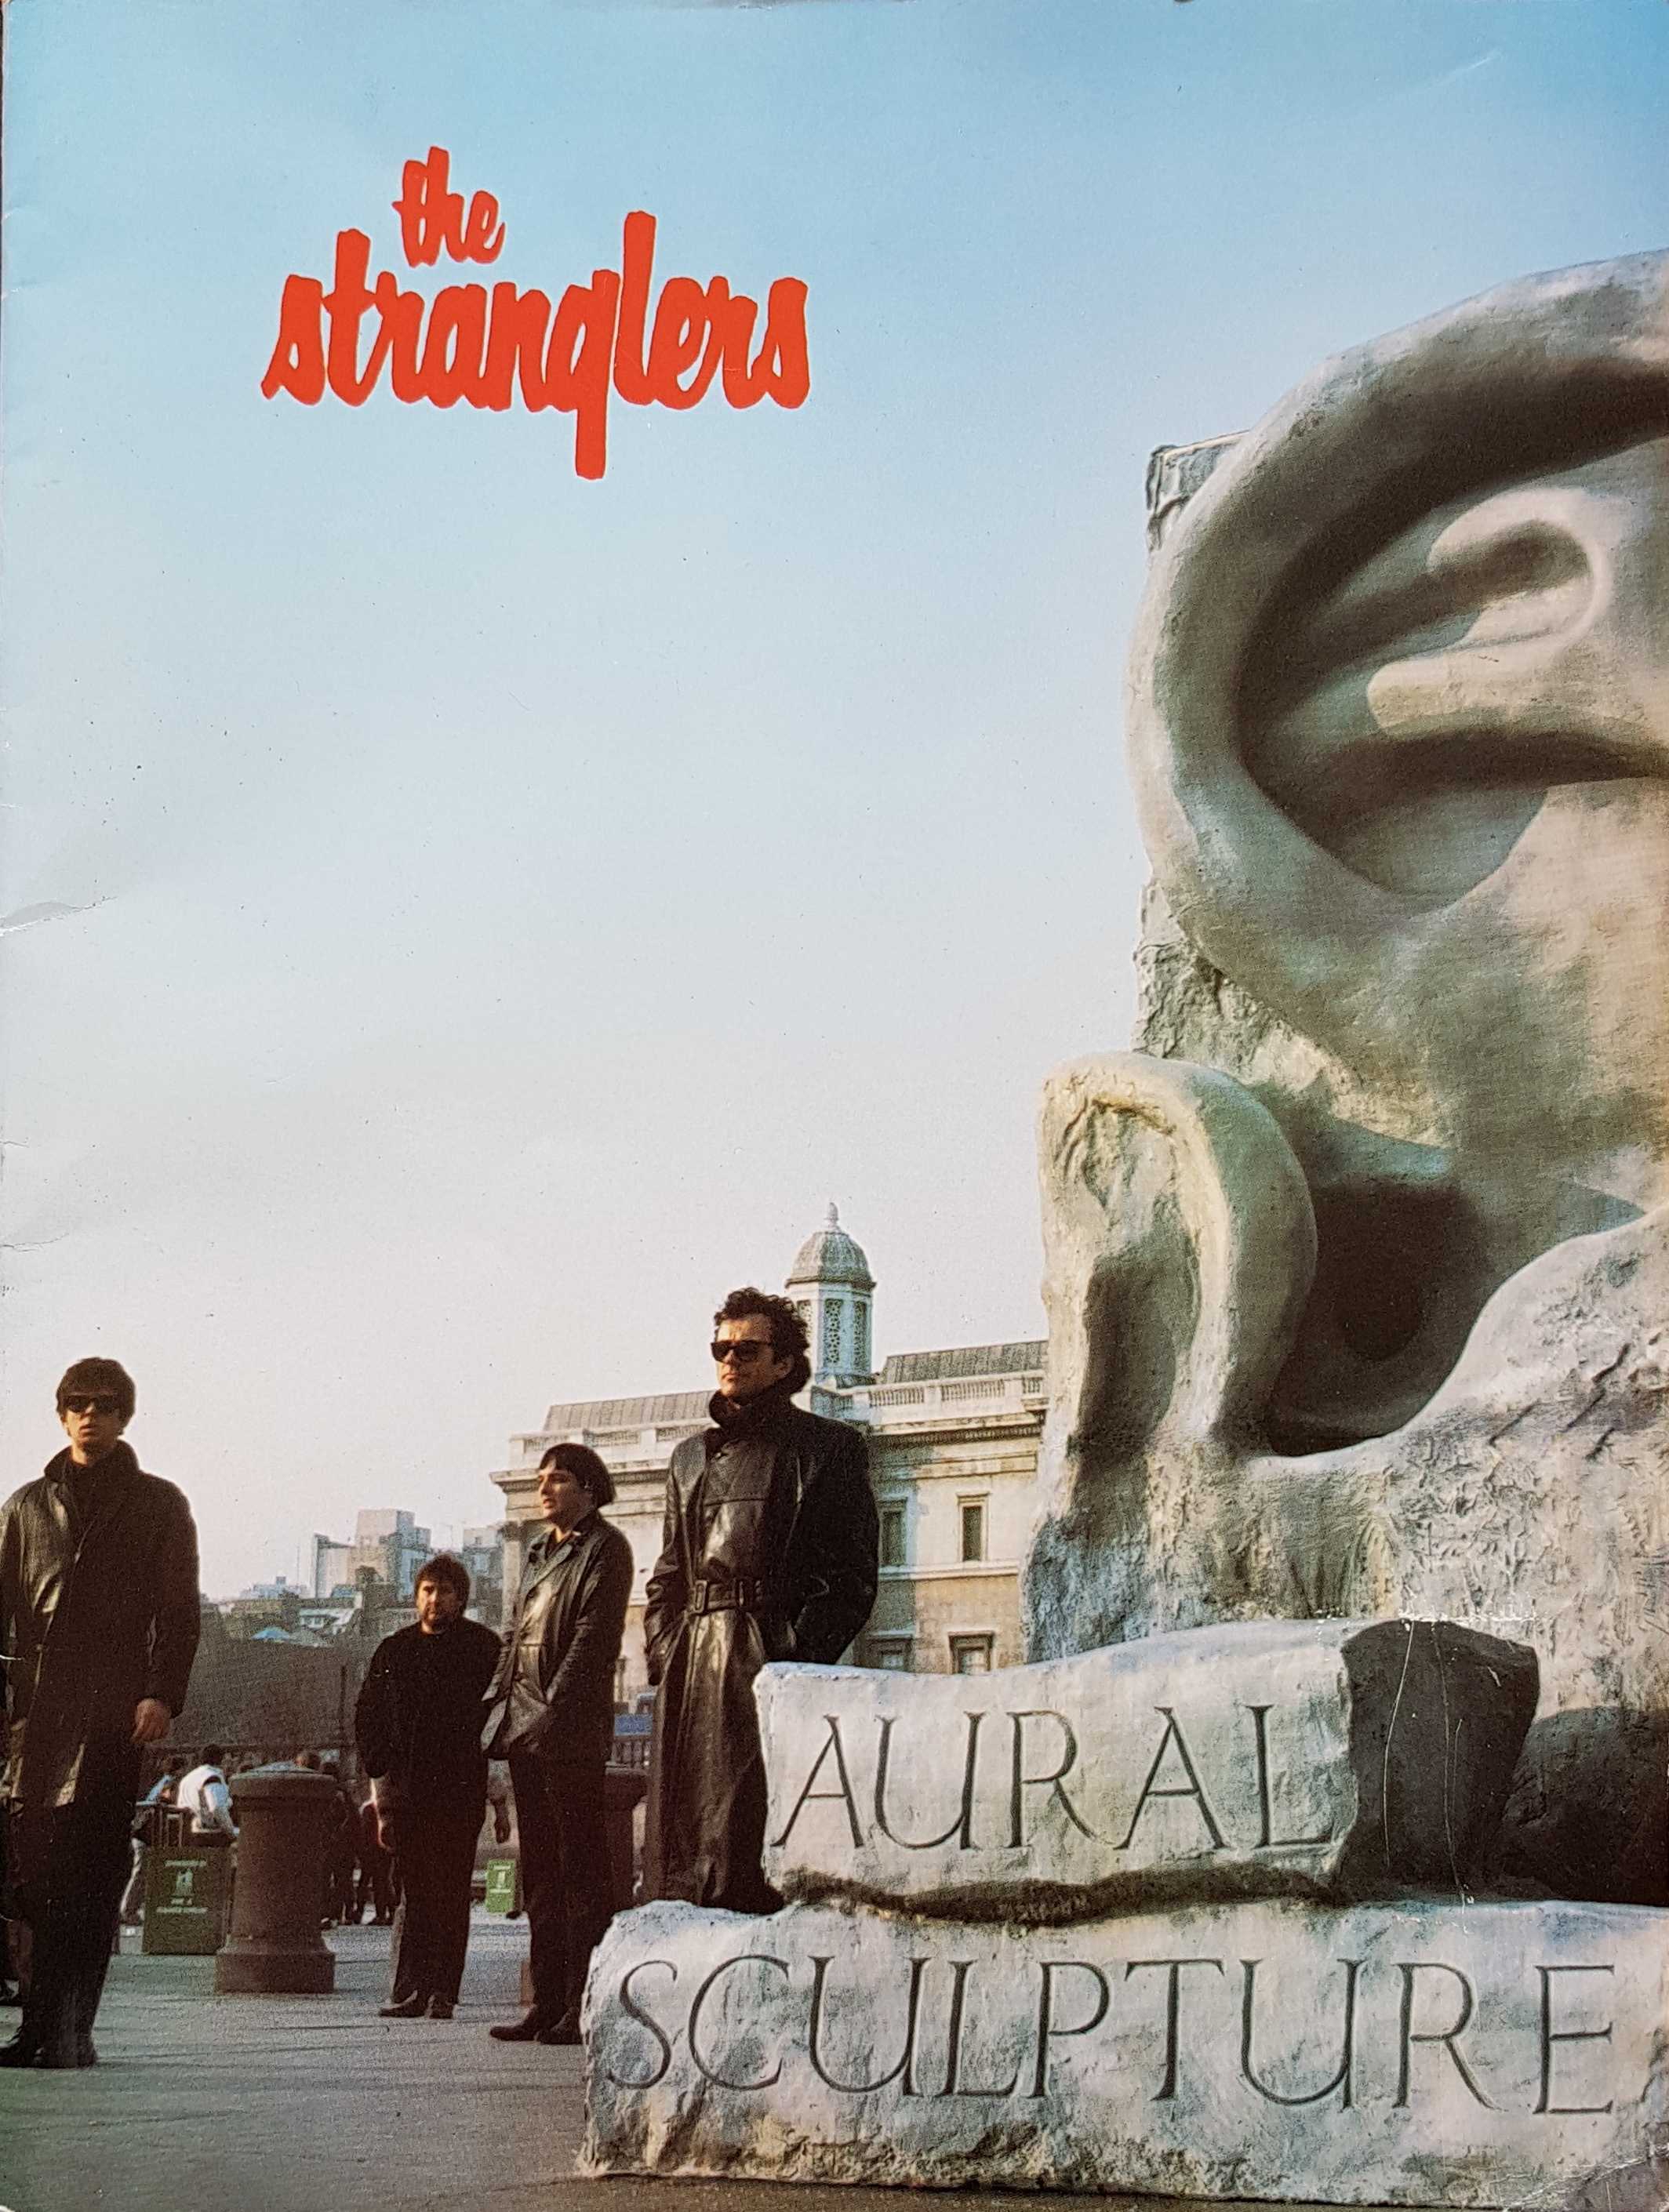 Picture of 0-86175-359-3 Aural sculpture by artist The Stranglers  from The Stranglers books